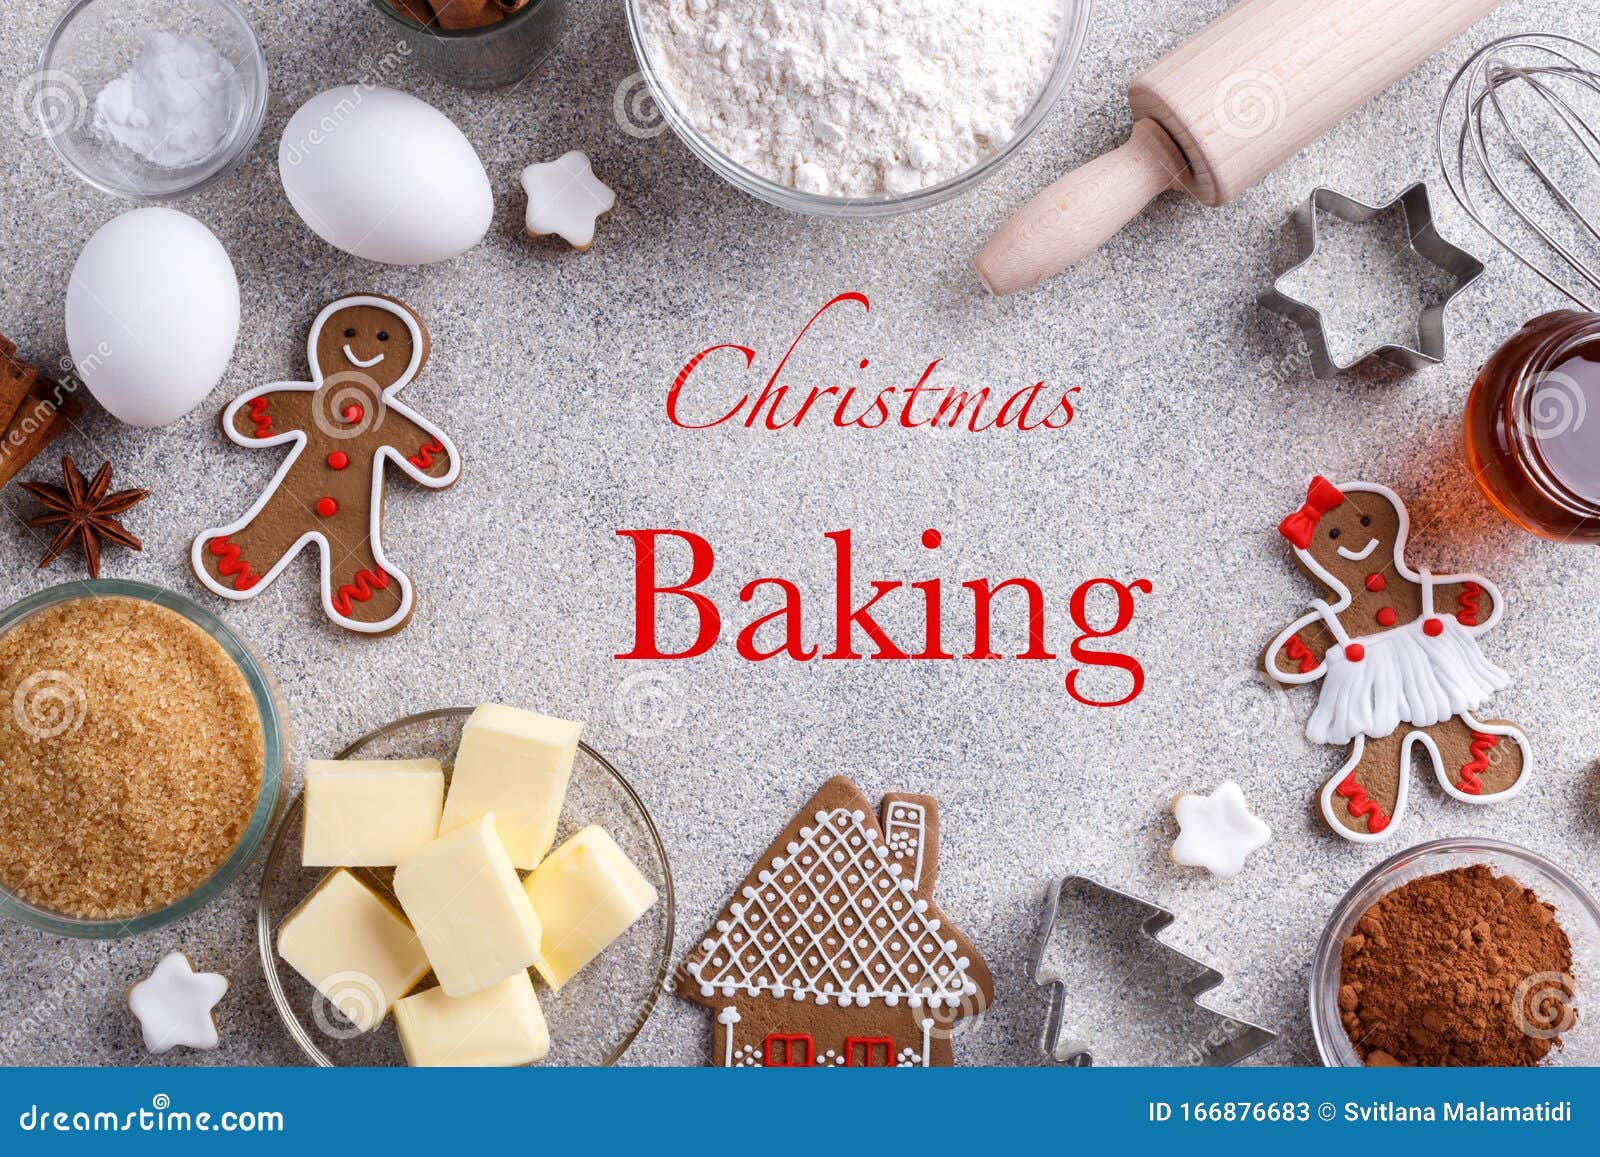 https://thumbs.dreamstime.com/z/holiday-baking-background-winter-holidays-flour-bakeware-sugar-butter-cookie-cutter-eggs-cinnamon-cookies-grey-stone-166876683.jpg